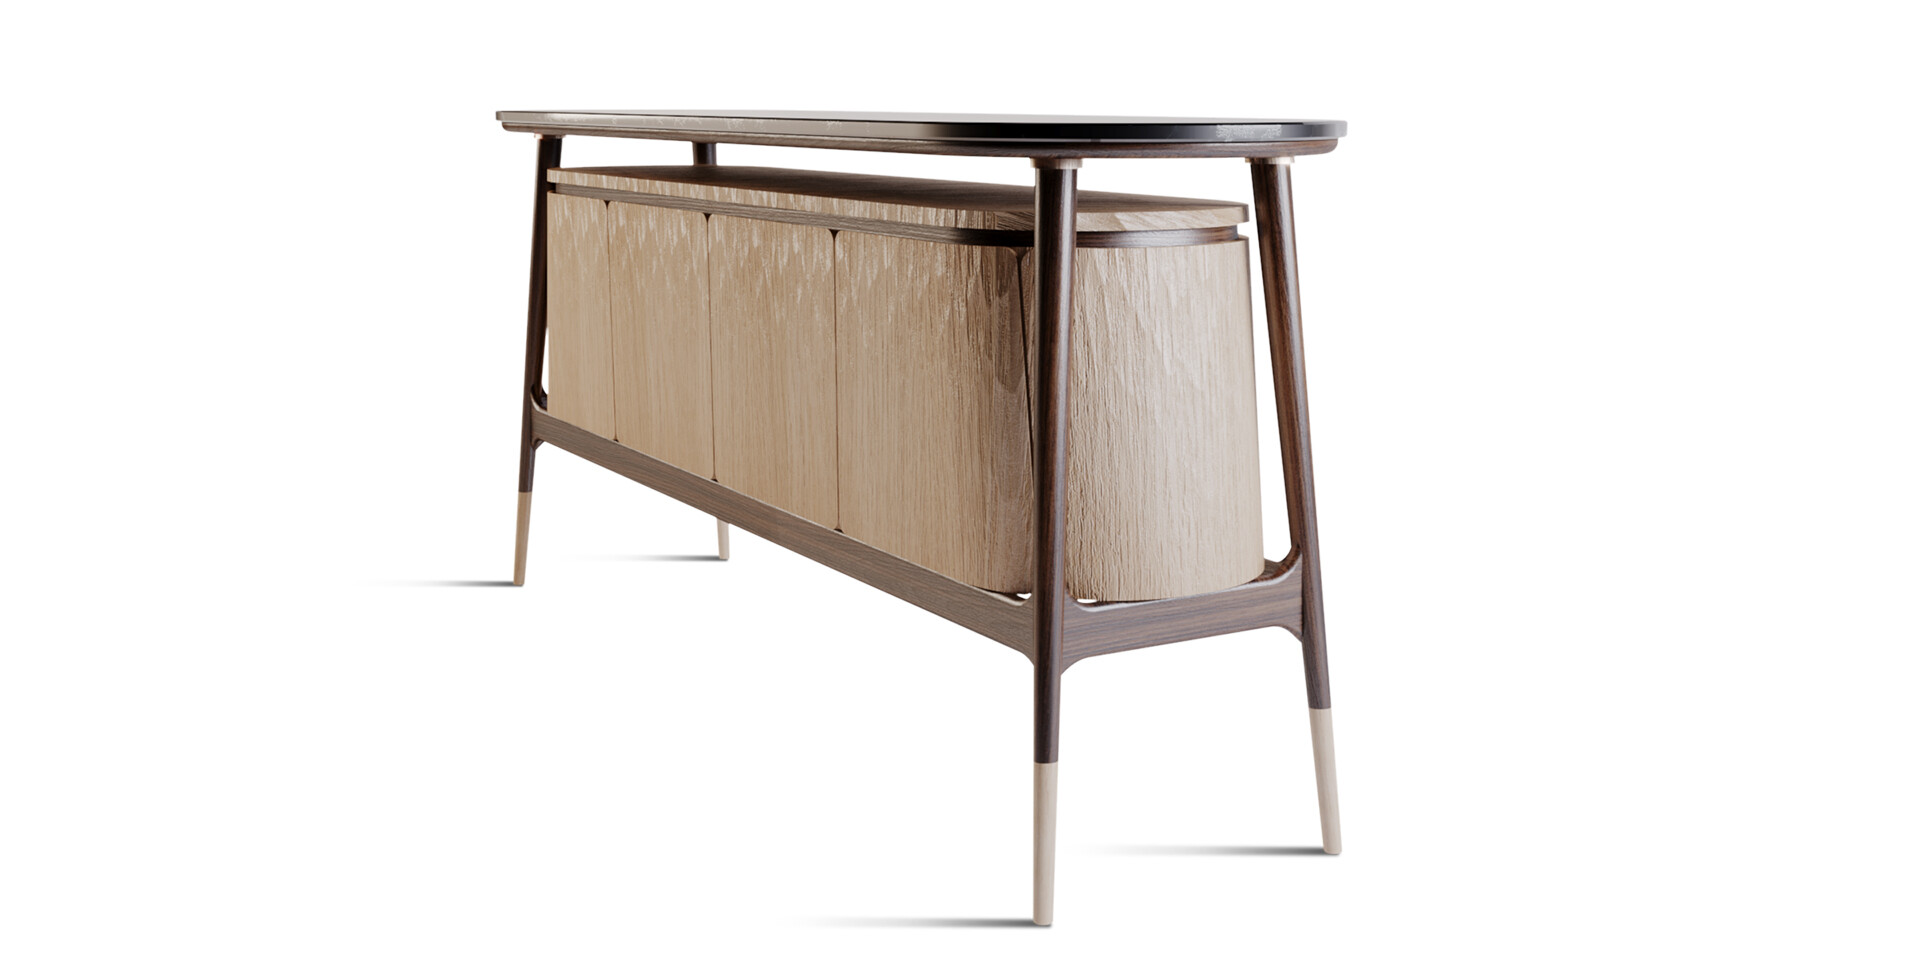 AT TURAIF SIDEBOARD - Side View - ALMA de LUCE